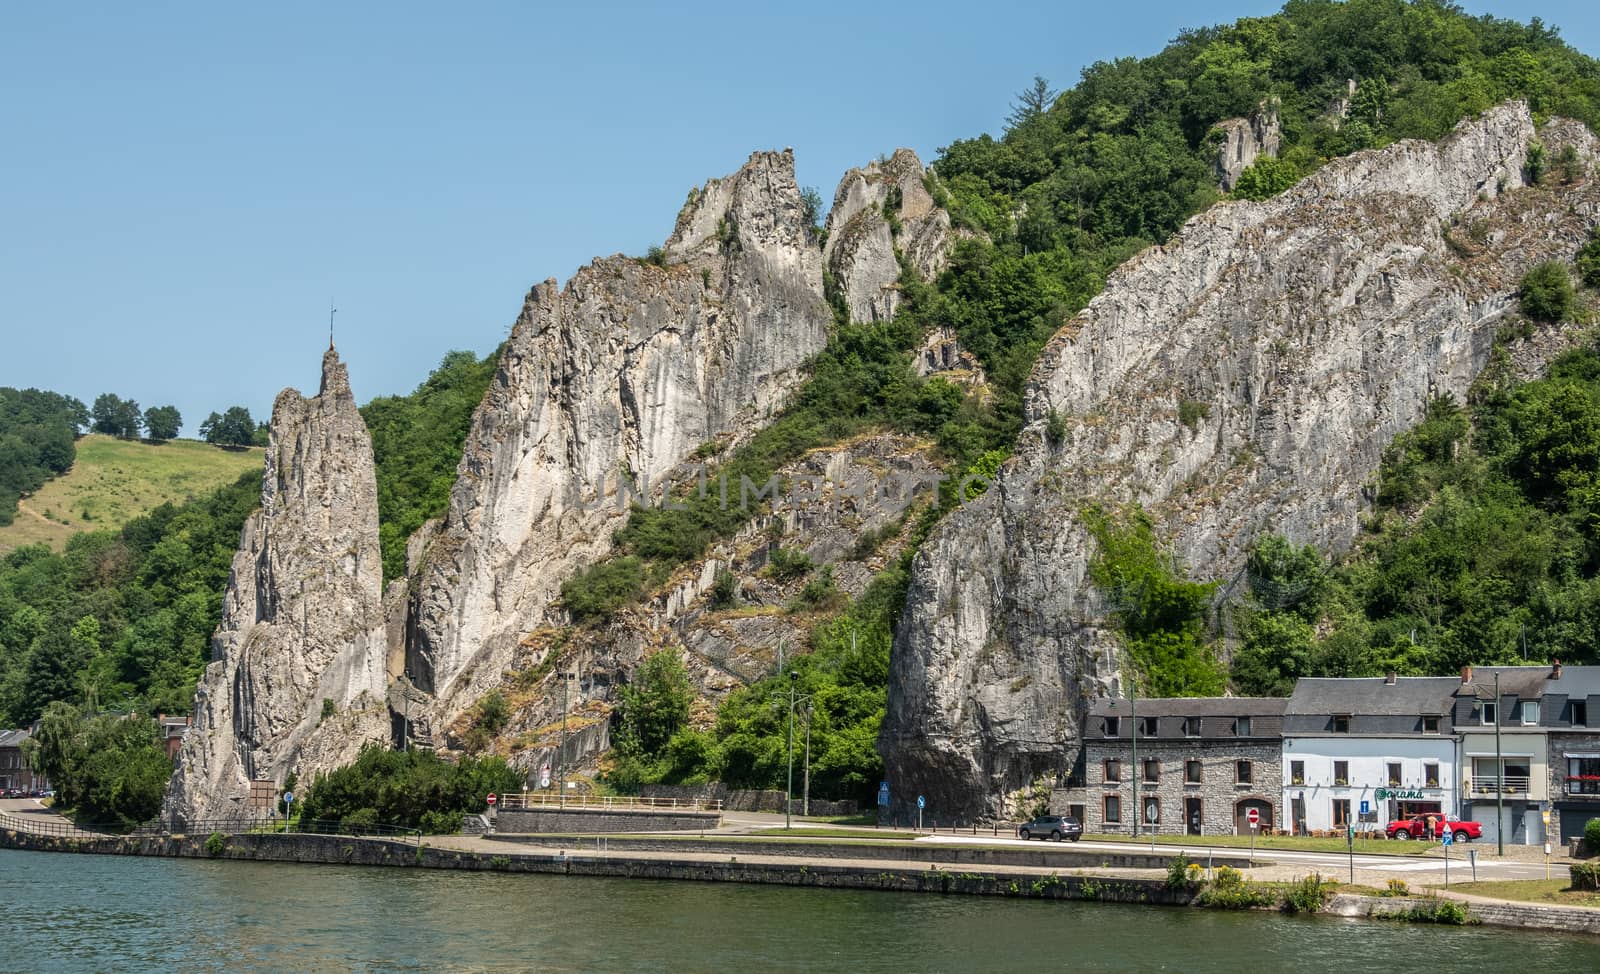 Dinant, Belgium - June 26, 2019: Wider view on South side of Le rocher Bayard along La Meuse River surrounded by green foliage under blue sky.